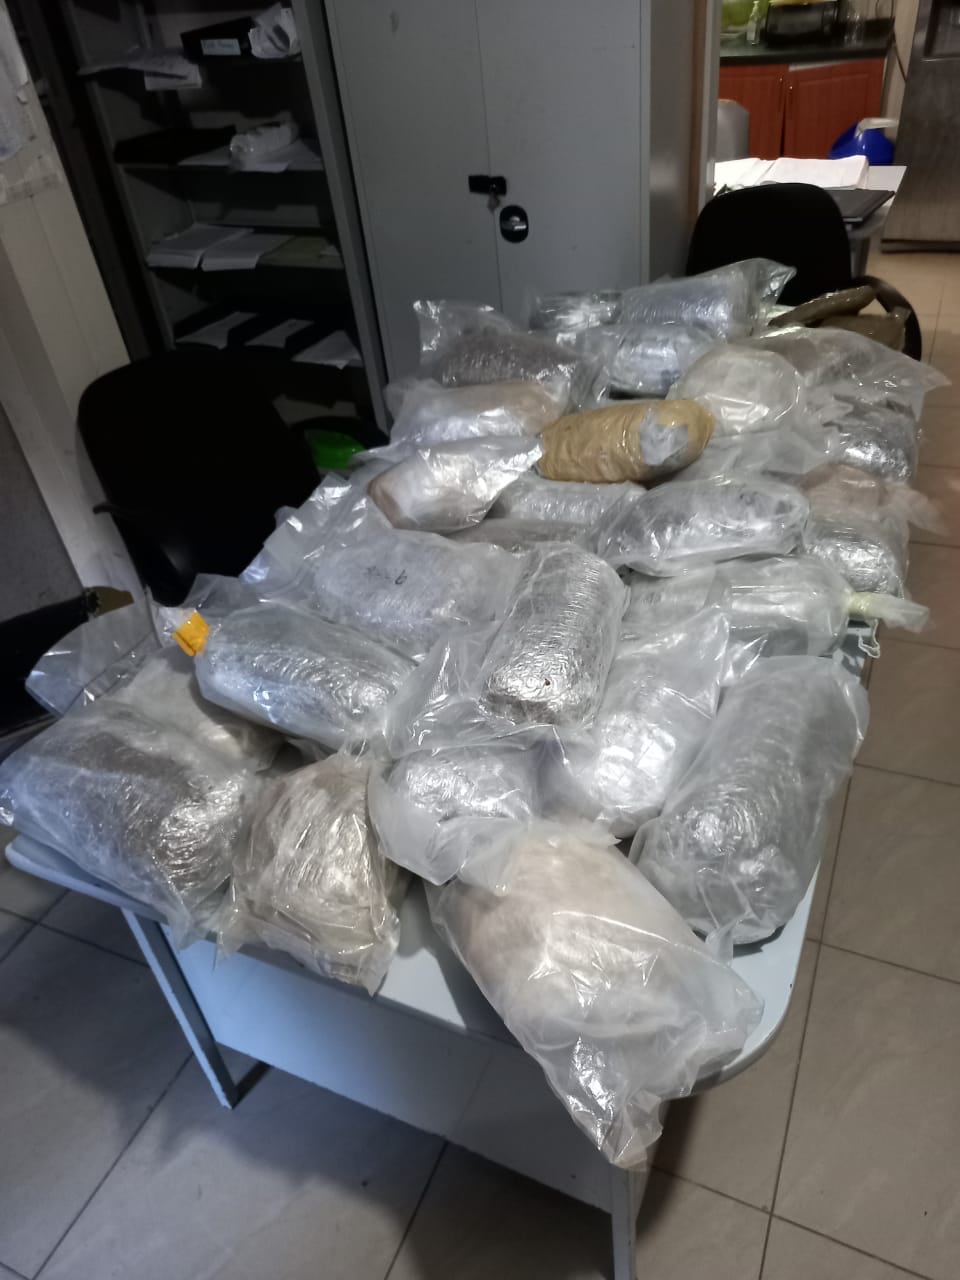 $1.3M in marijuana seized by Central Division police officers